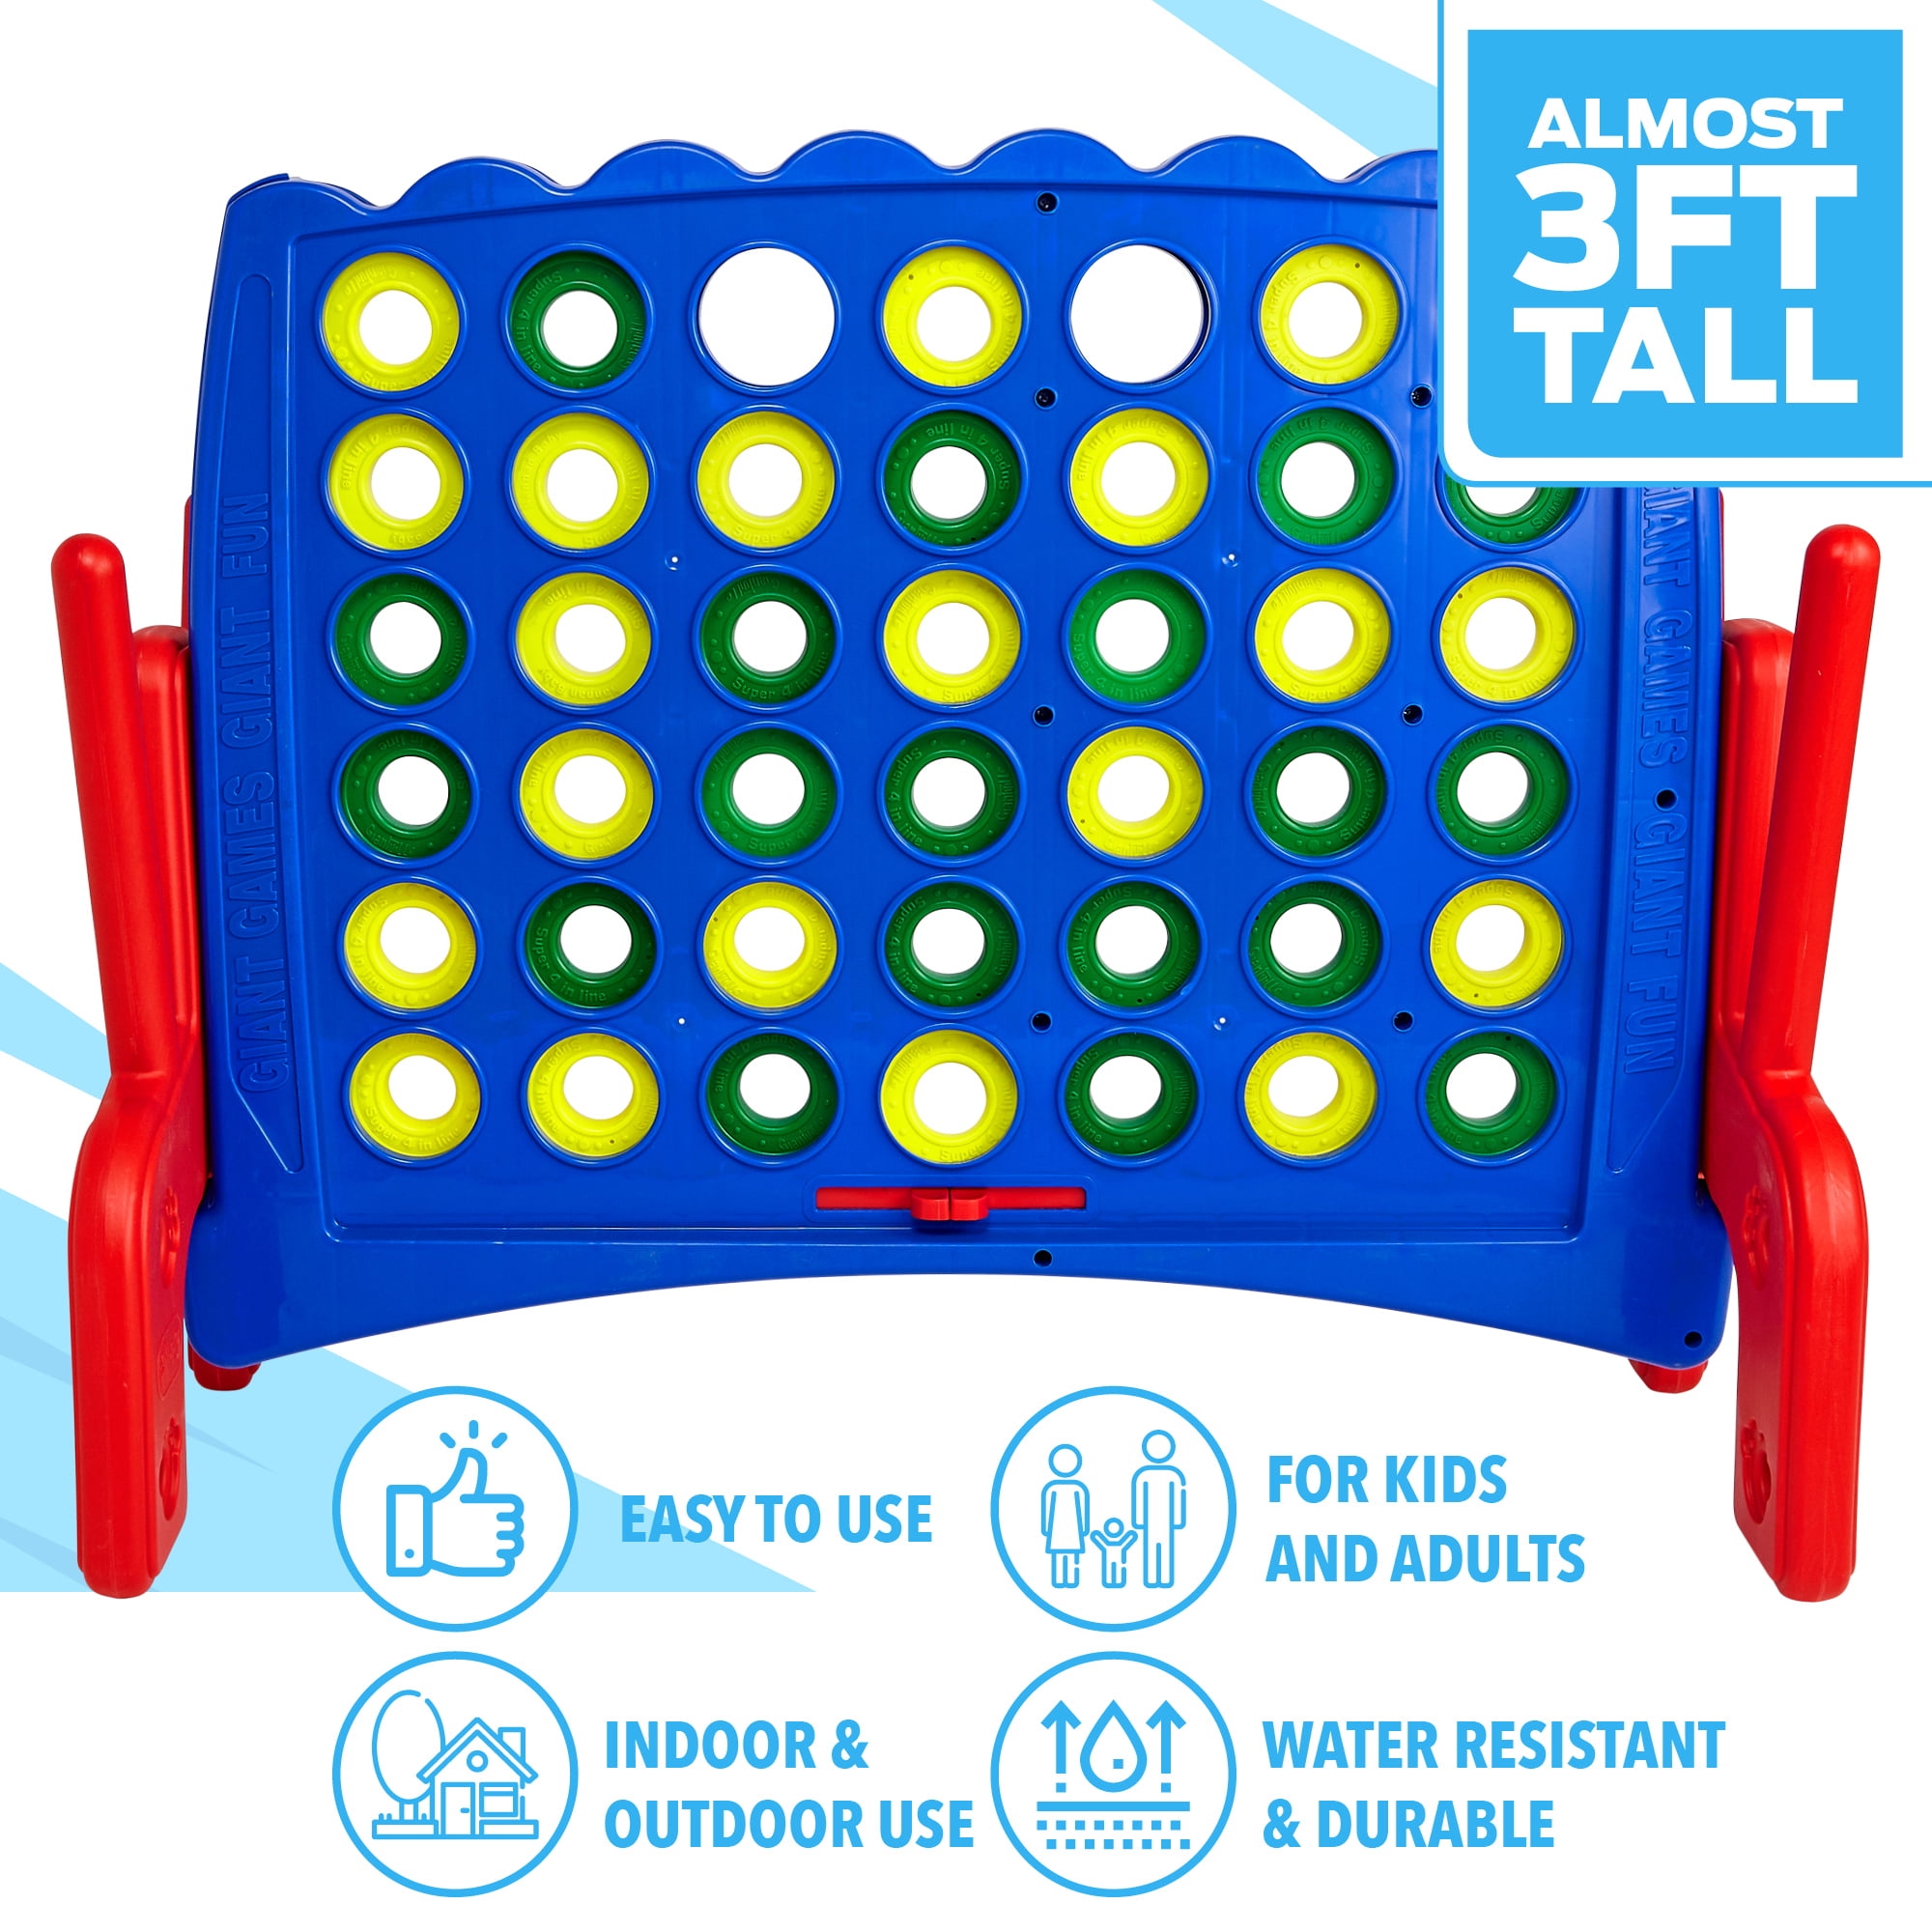 Durable Weatherproof Giant 4 in a Row Connect Game Jr Easy Assembly - Storage Carry Bag Included Nearly 3 Feet Tall Large Indoor and Outdoor Family Party Game for Kids and Adults 